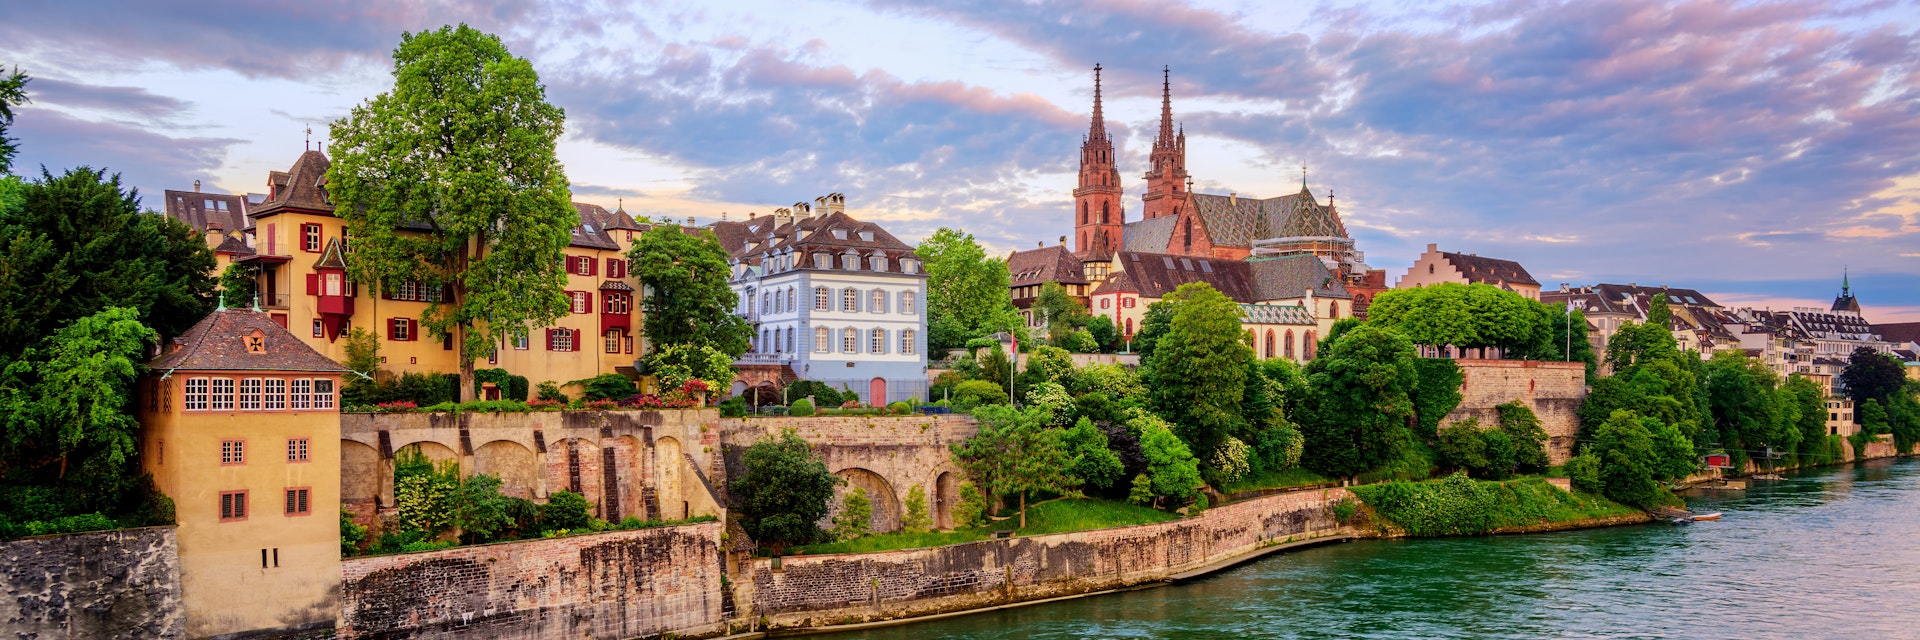 Panoramic view of the Old Town of Basel with red stone Munster cathedral and the Rhine river, Switzerland